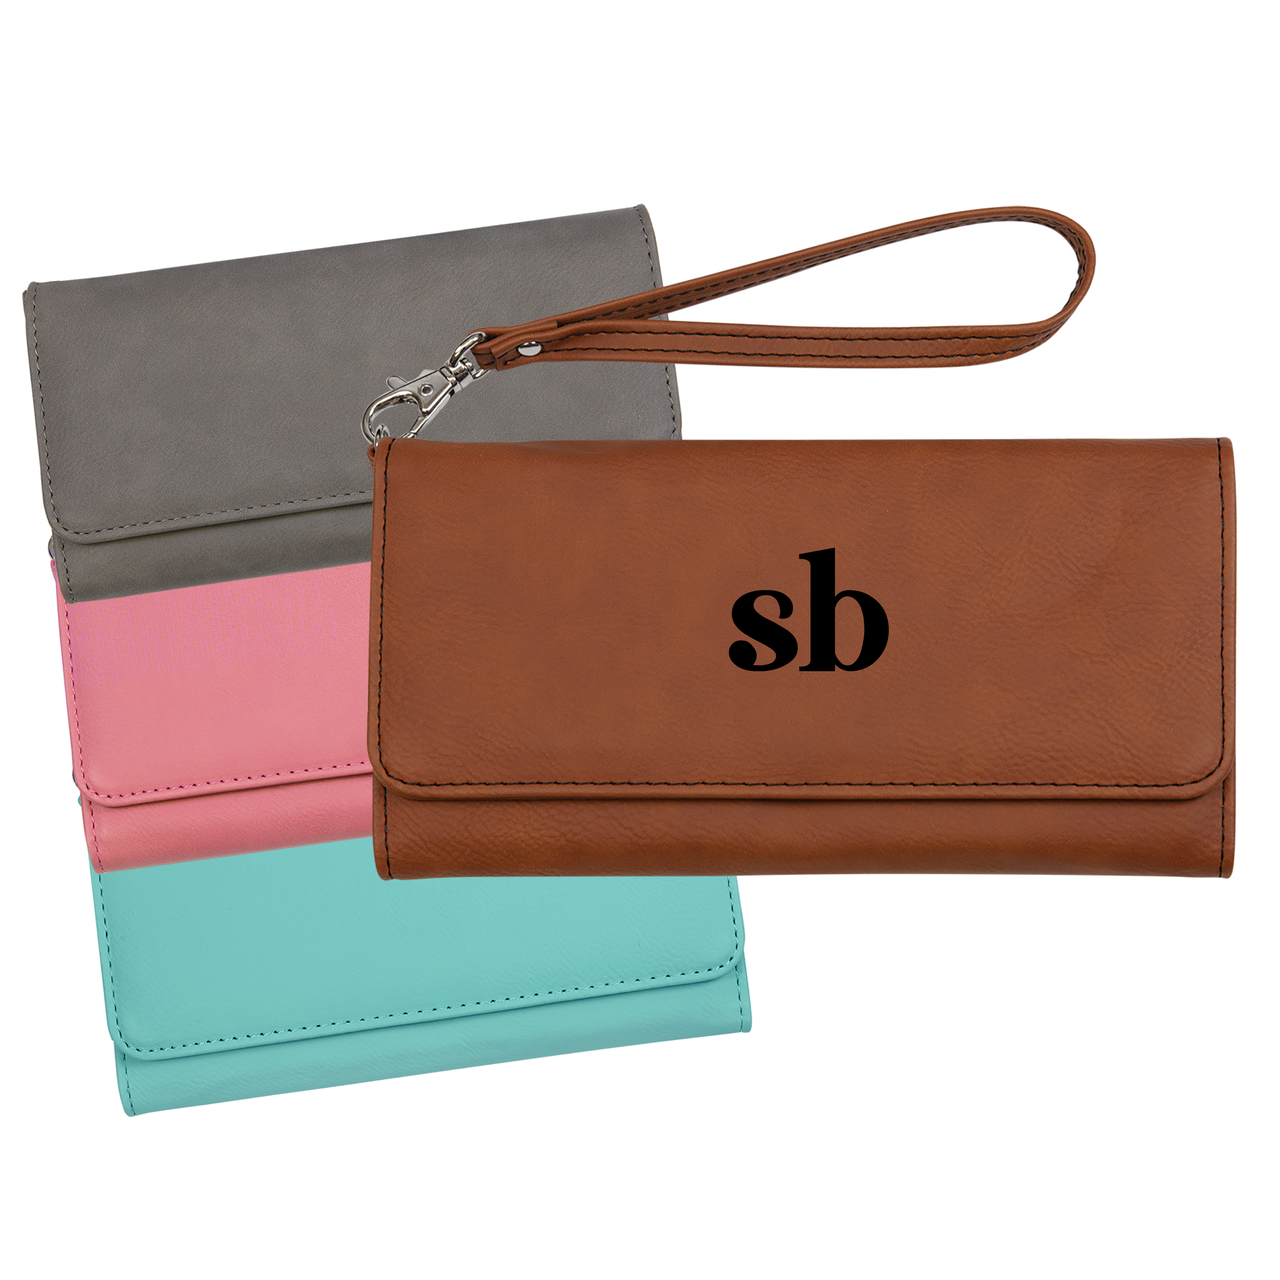 Personalized Monogram Wallet With Strap Faux Leather Large Women's Wallet Baum Designs